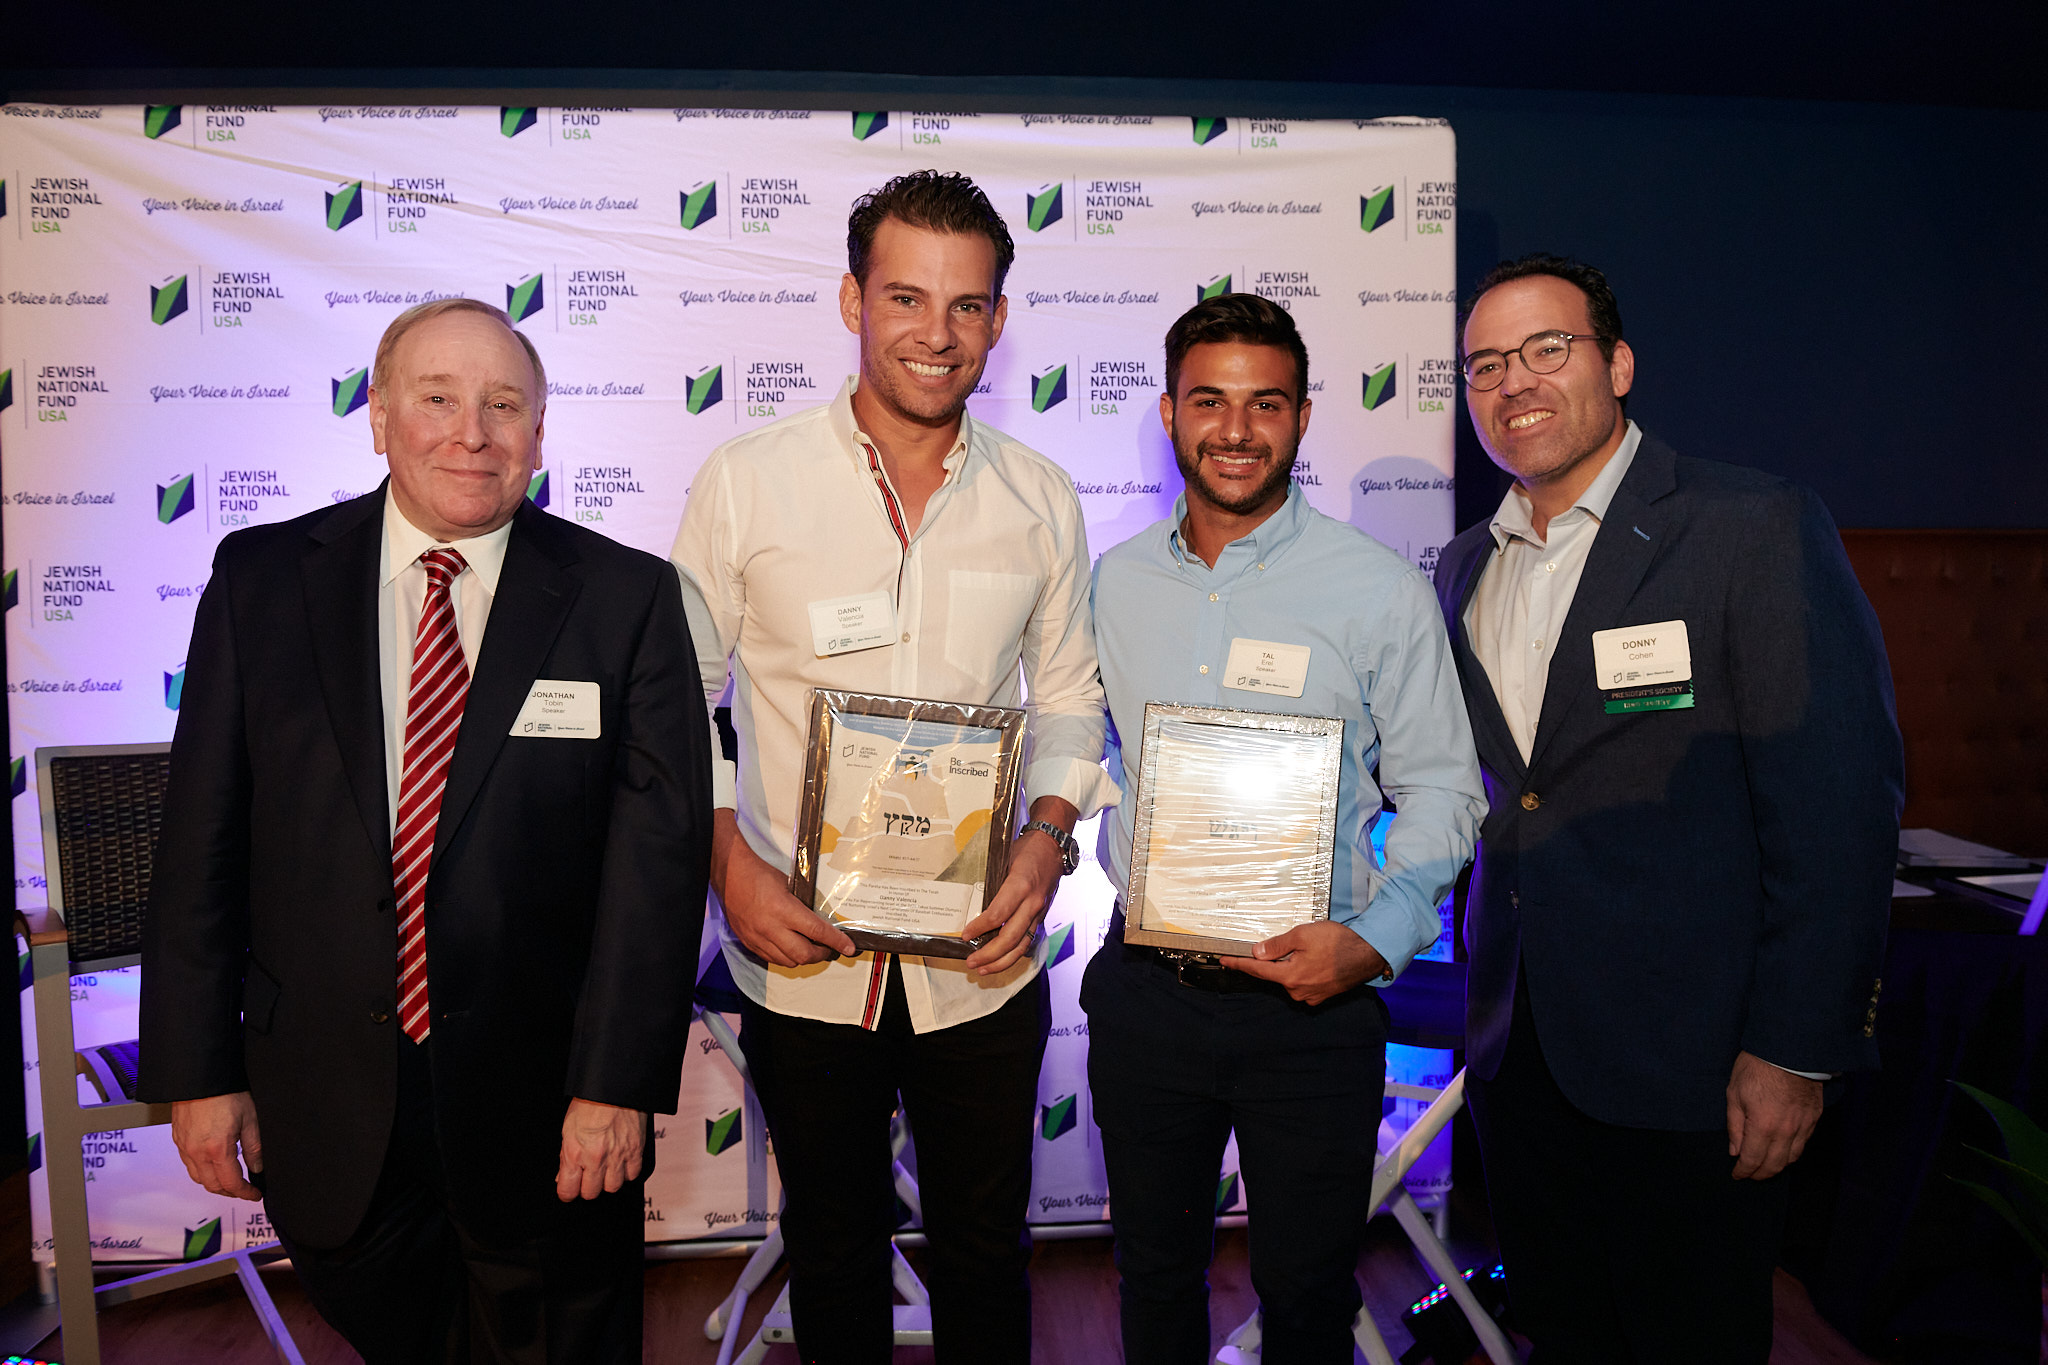 Editor-in-Chief of JNS, Jonathan Tobin; Team Israel Olympic baseball players, Danny Valencia and Tal Erel, and Donny Cohen